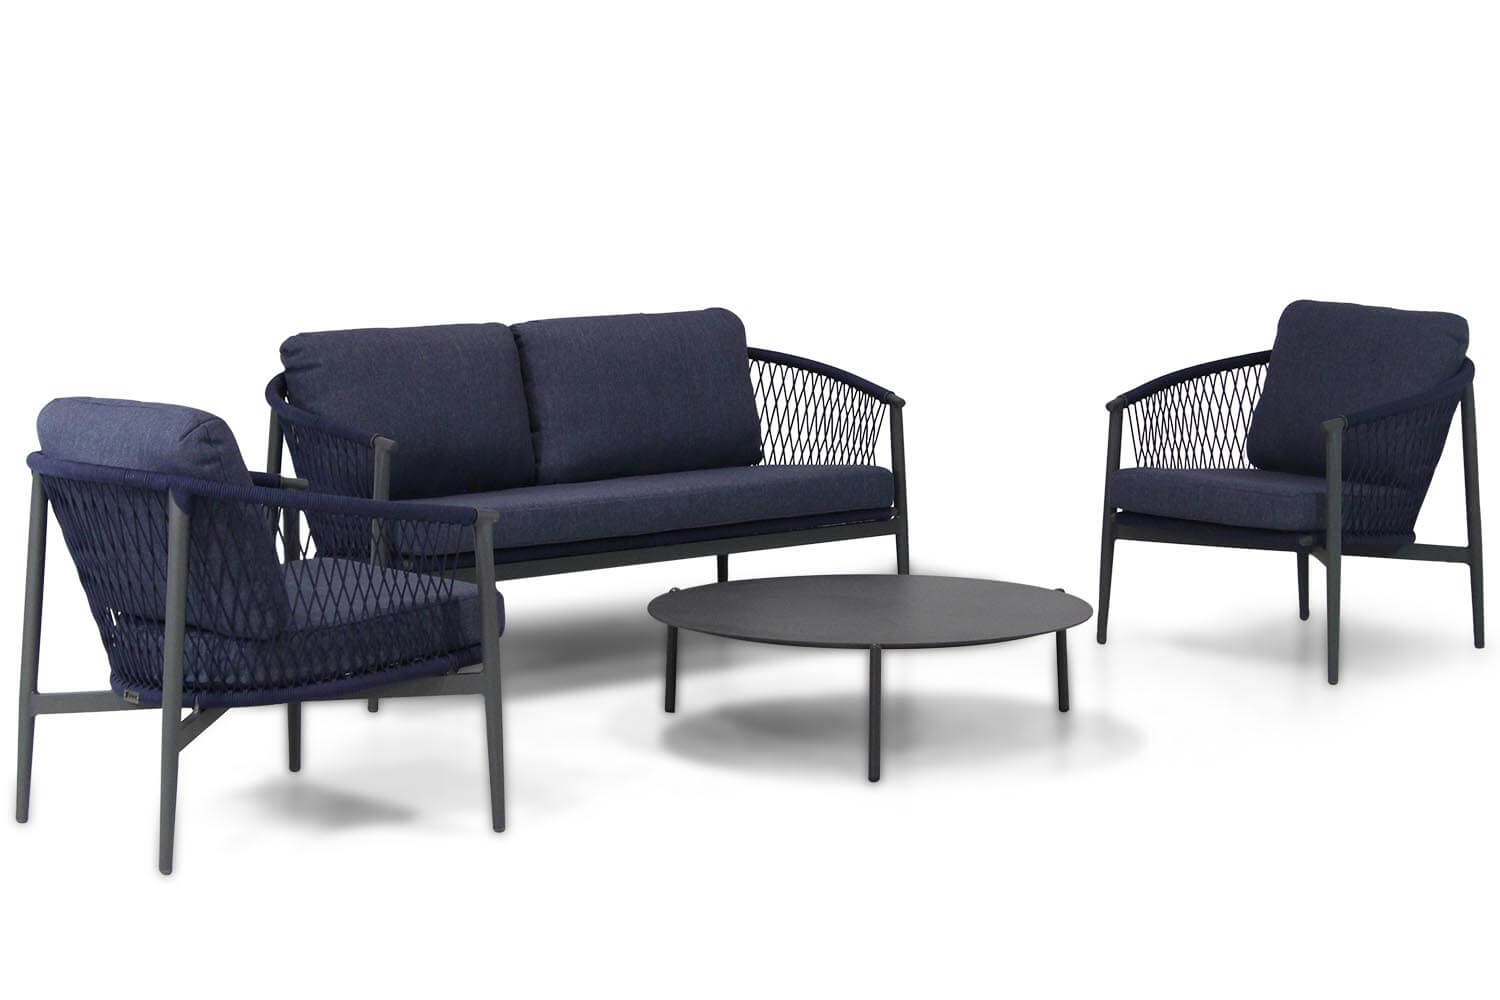 Aanbieding Lifestyle Antaly/Pacific 100 cm stoel-bank loungeset 4-delig